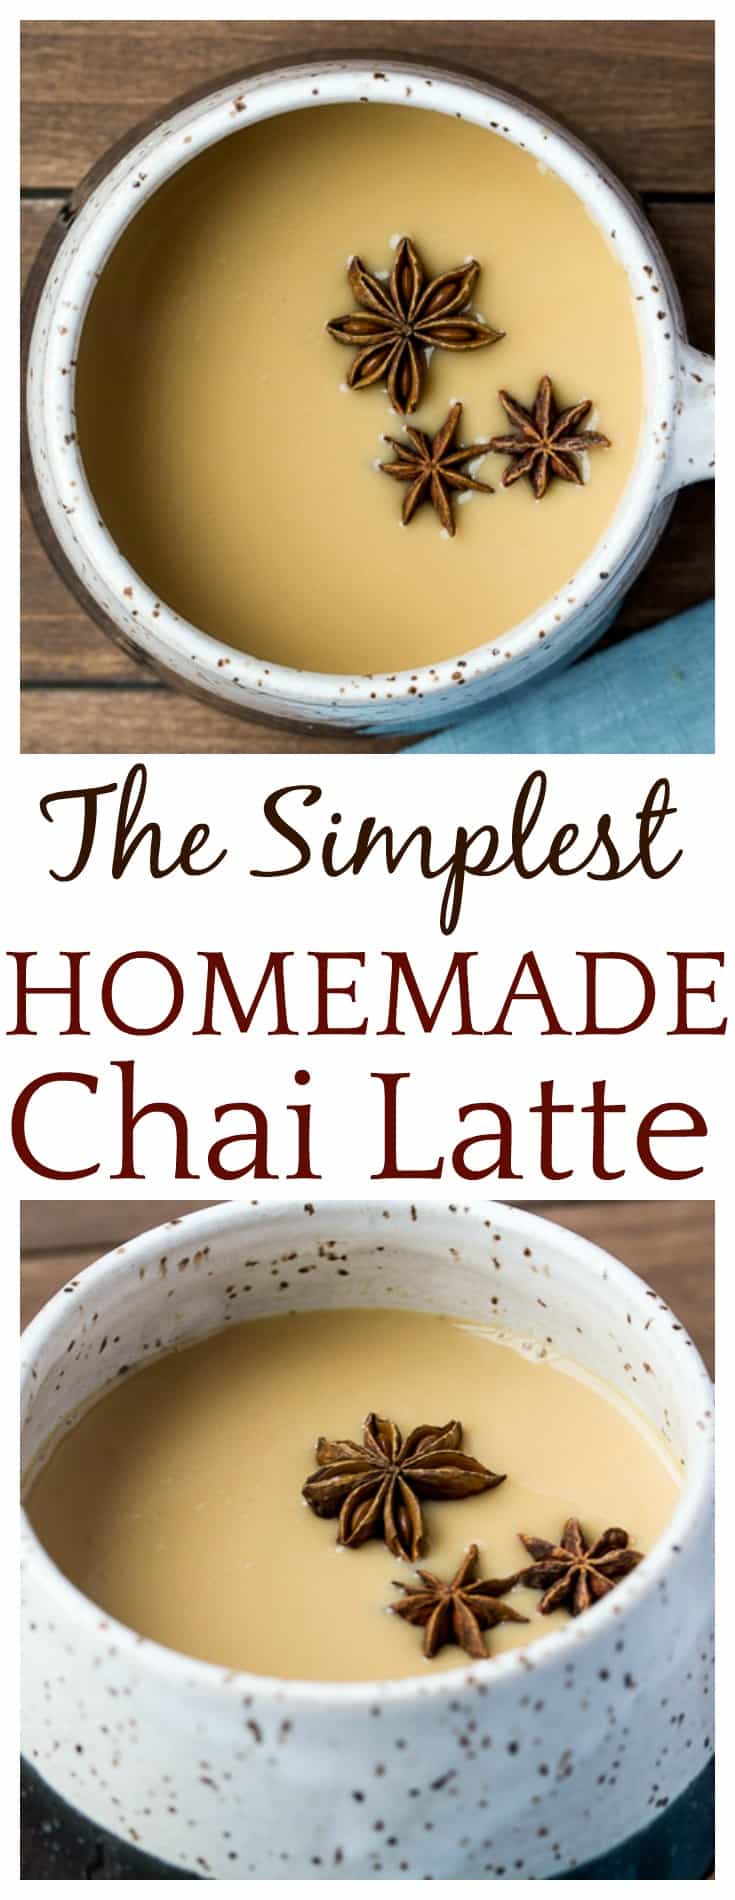 After spending a bit too much money on fancy coffee house chai tea latte, a little "what if" led to the creation of this super simple Homemade Chai Tea Latte! Save time and money with this easy hack to make them yourself anytime you want! #homemade #chaitea #chaitealatte #homemadechaitea #easyrecipes #dlbrecipes